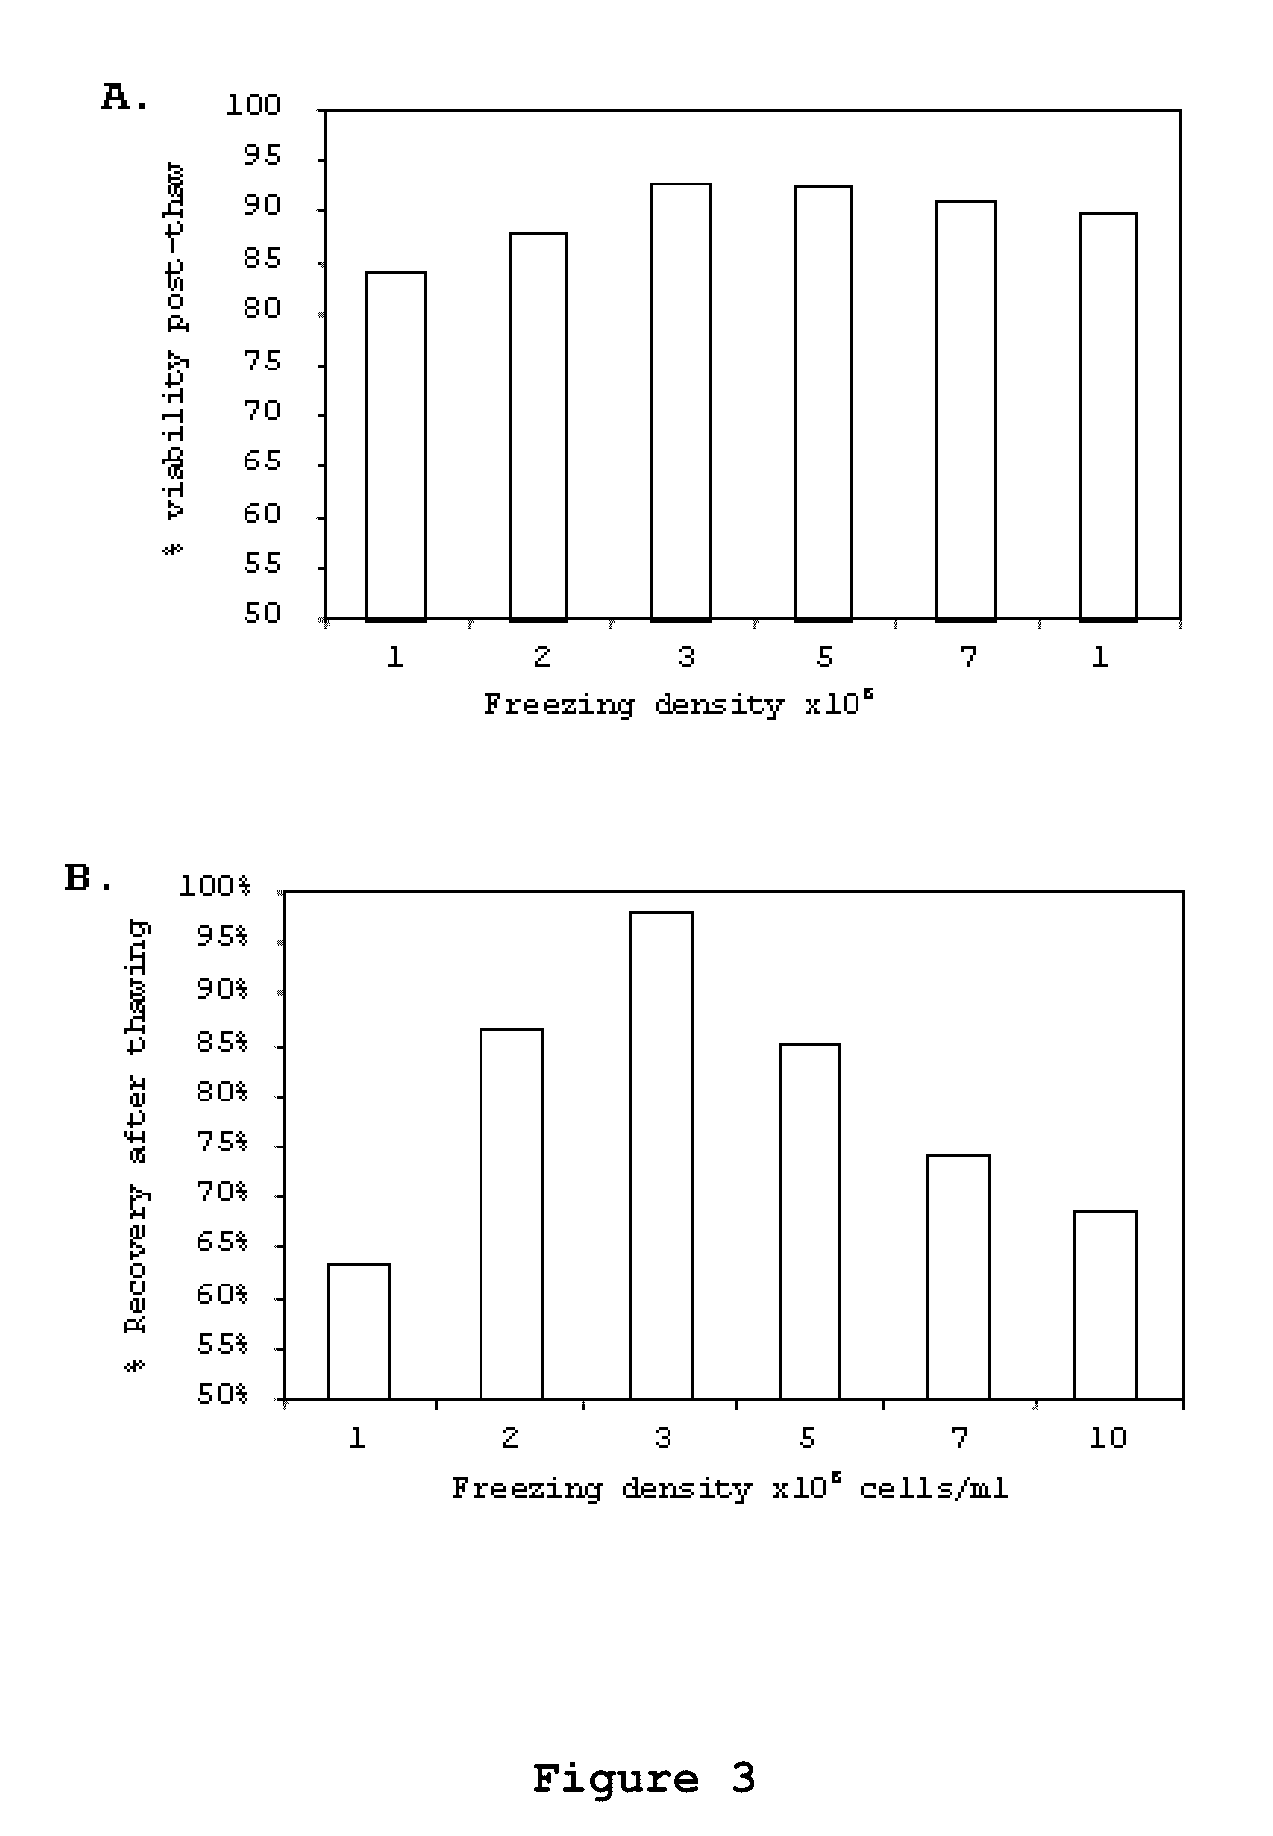 Optimized and defined method for isolation and preservation of precursor cells from human umbilical cord